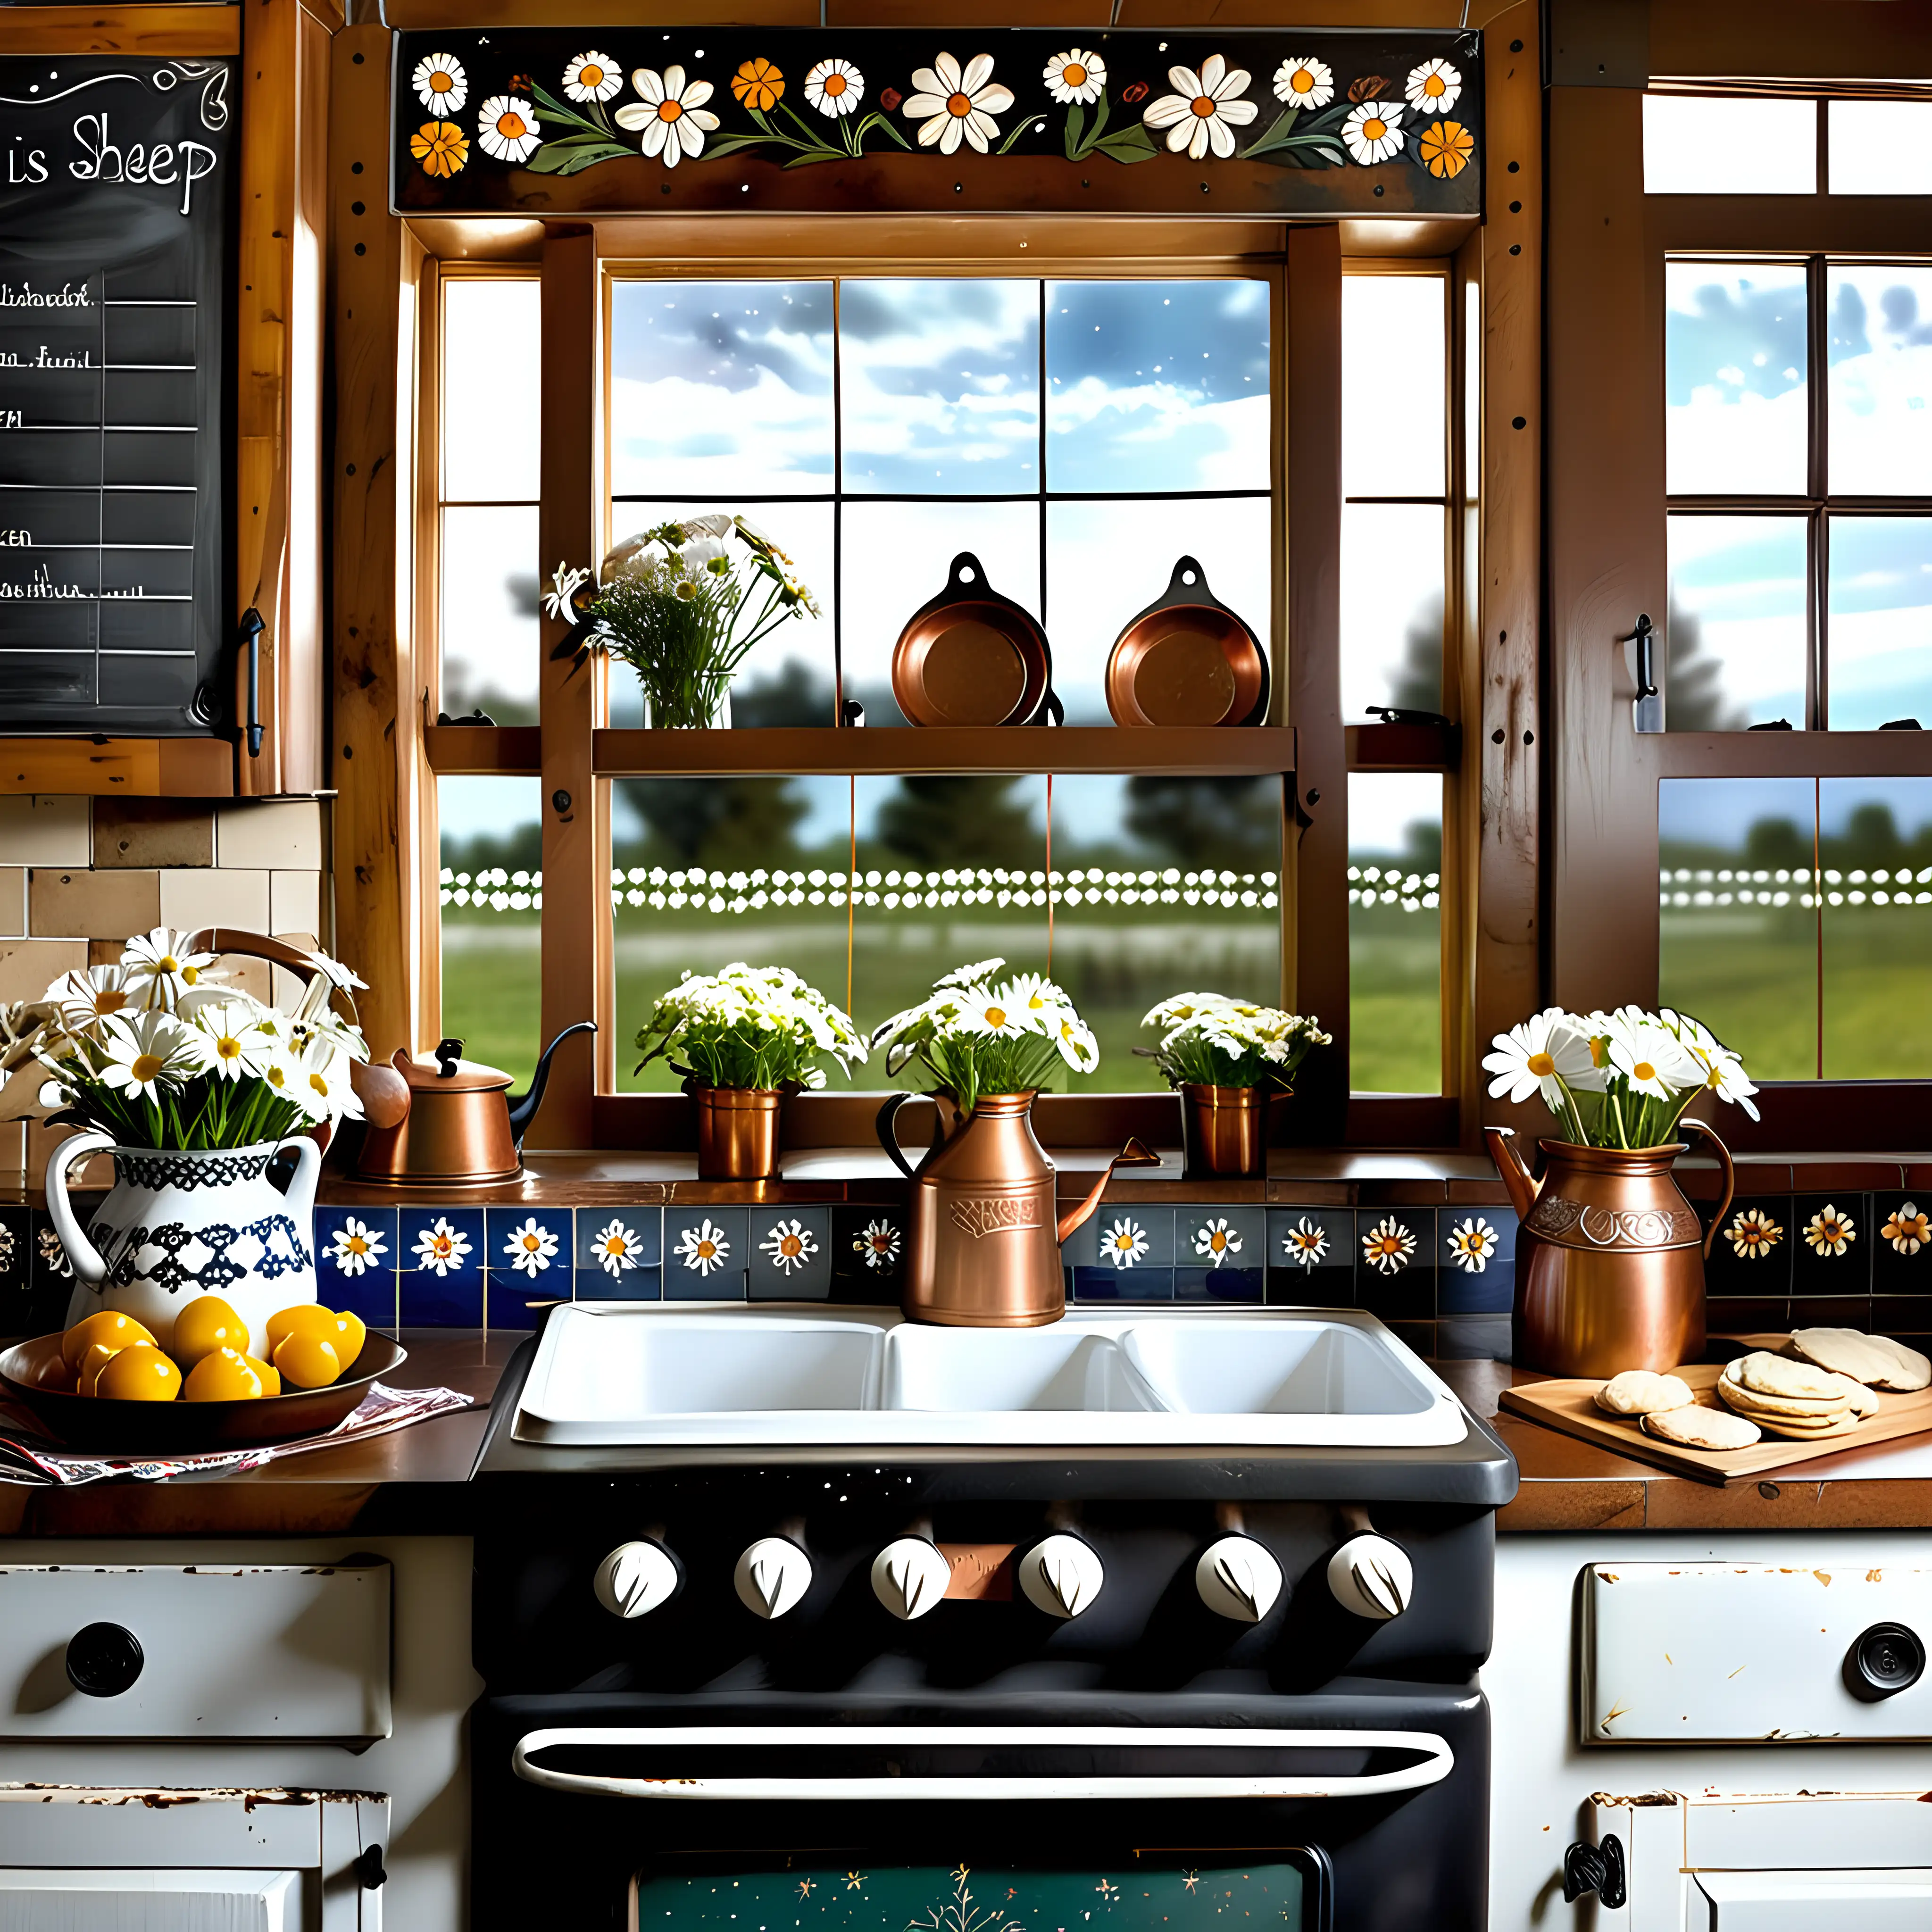 Cozy Rustic Kitchen with HandPainted Tiles and Copper Pots